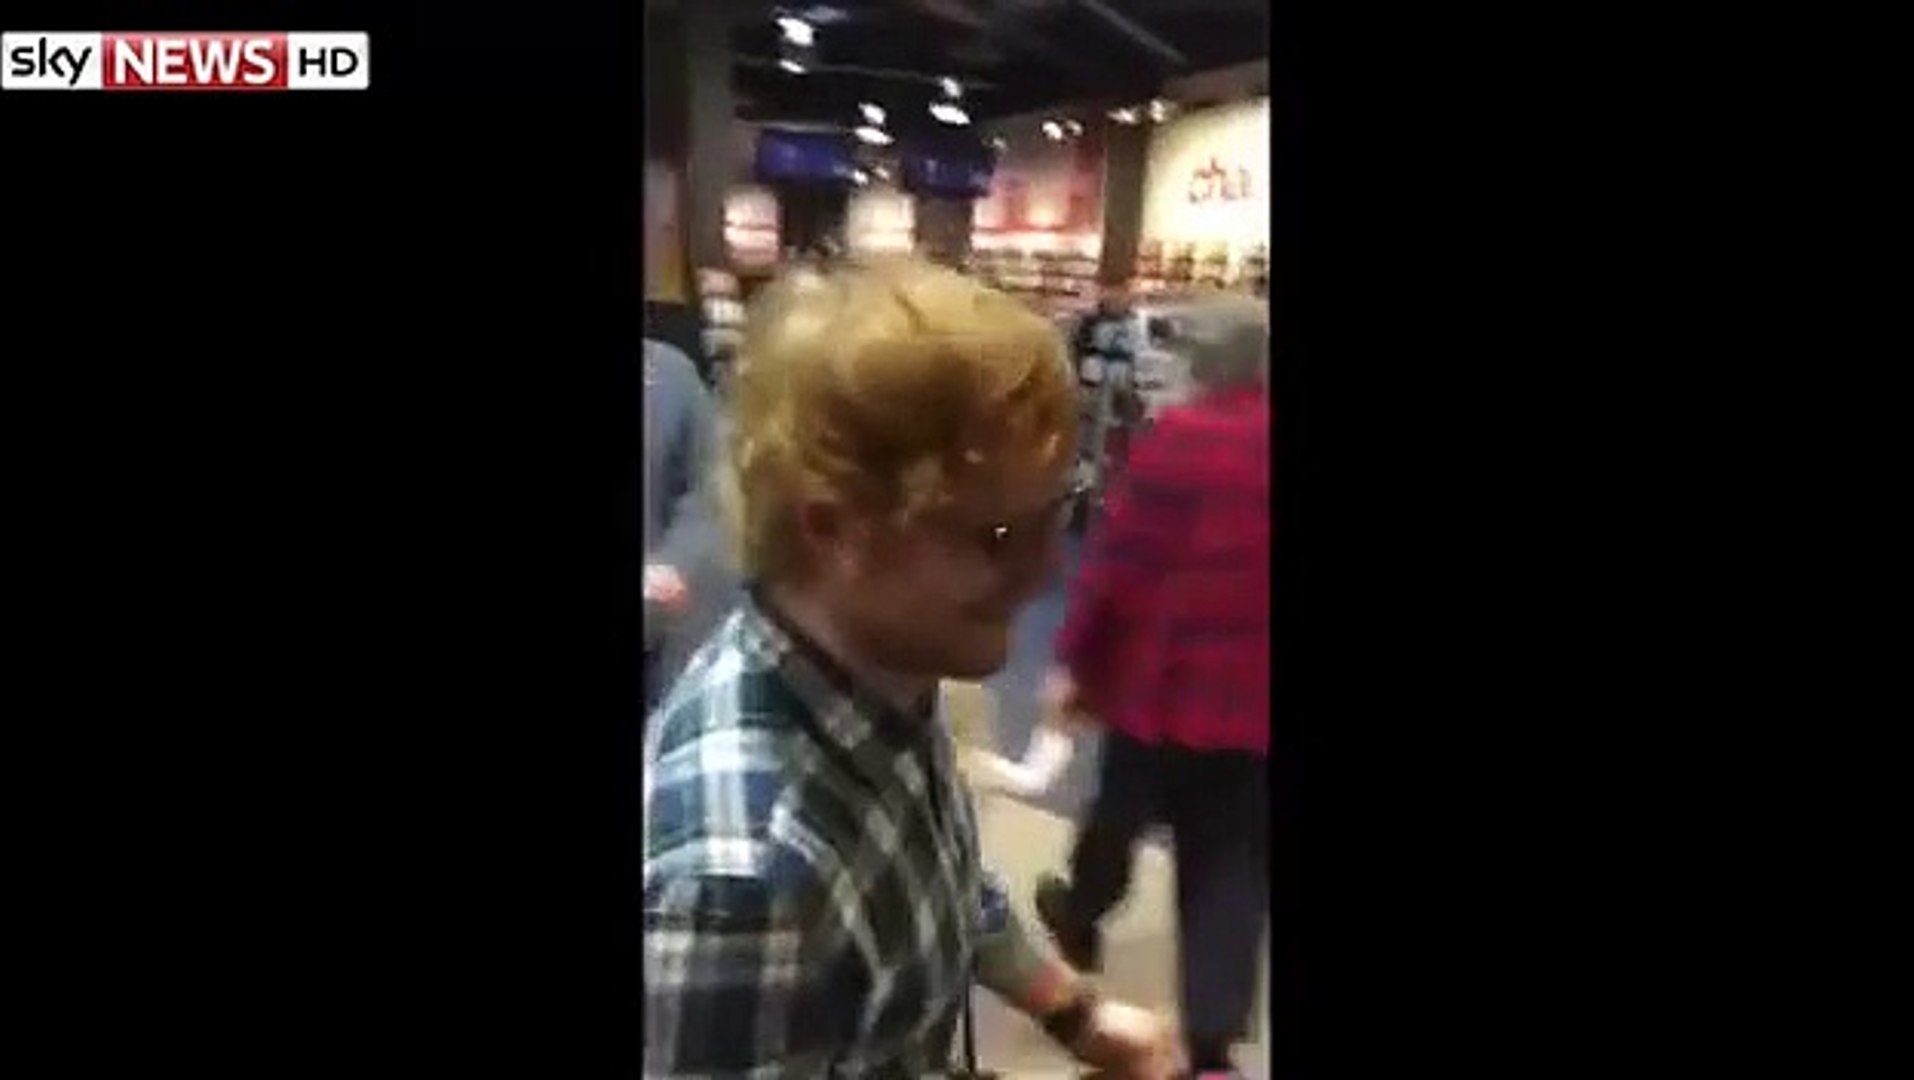 Watch what happened when Ed Sheeran heard a fan singing one of his songs in a shopping